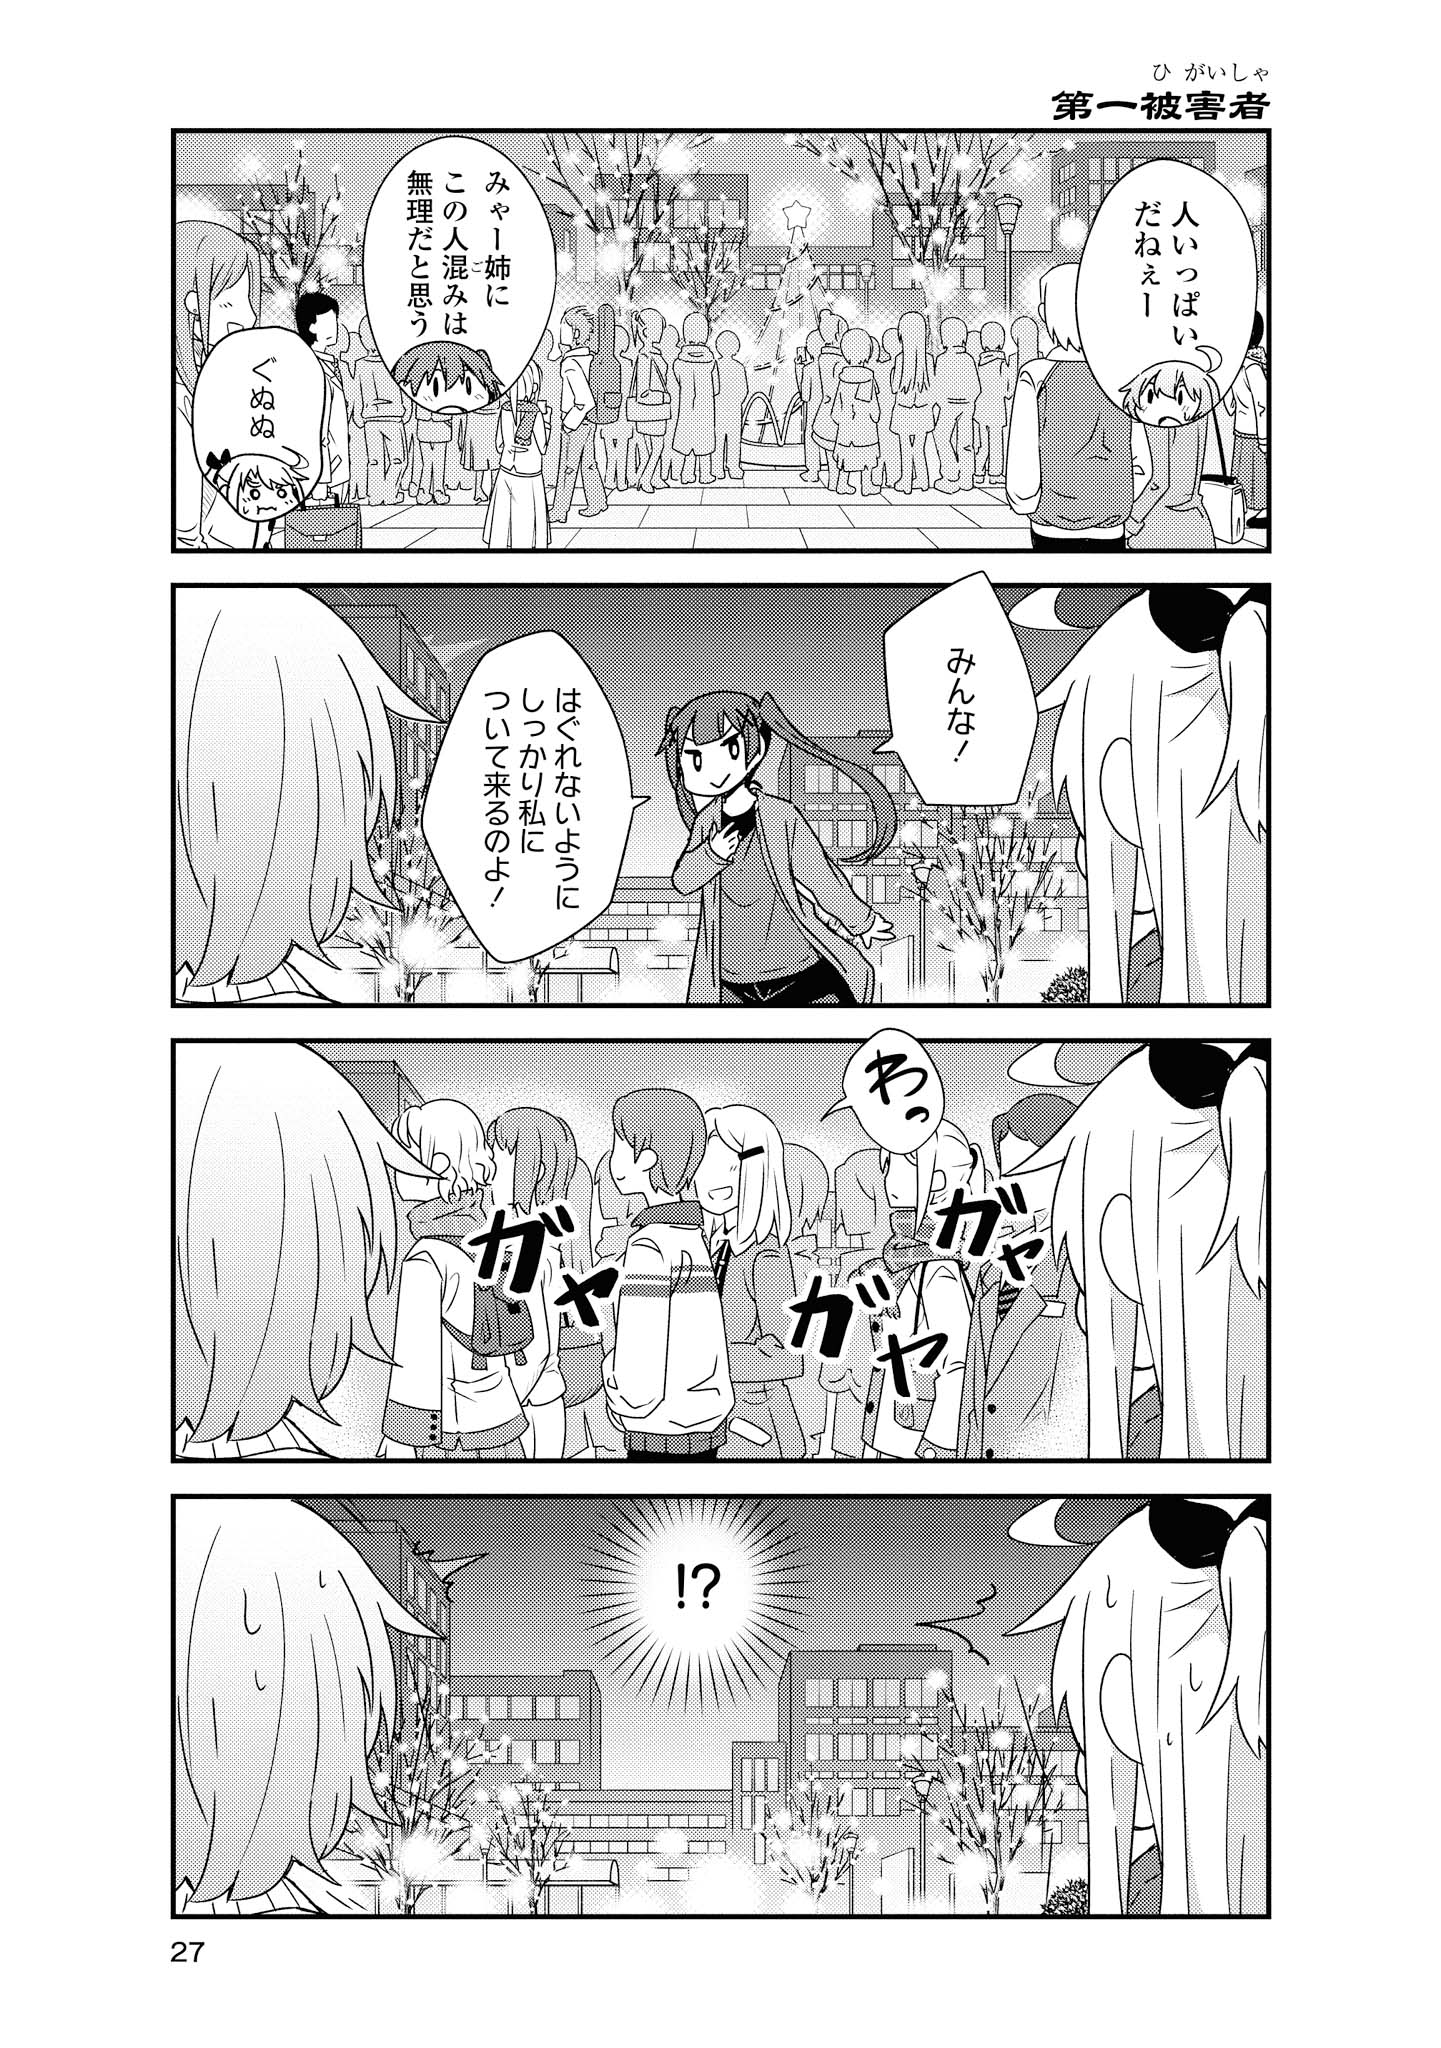 Wataten! An Angel Flew Down to Me 私に天使が舞い降りた！ 第45話 - Page 3